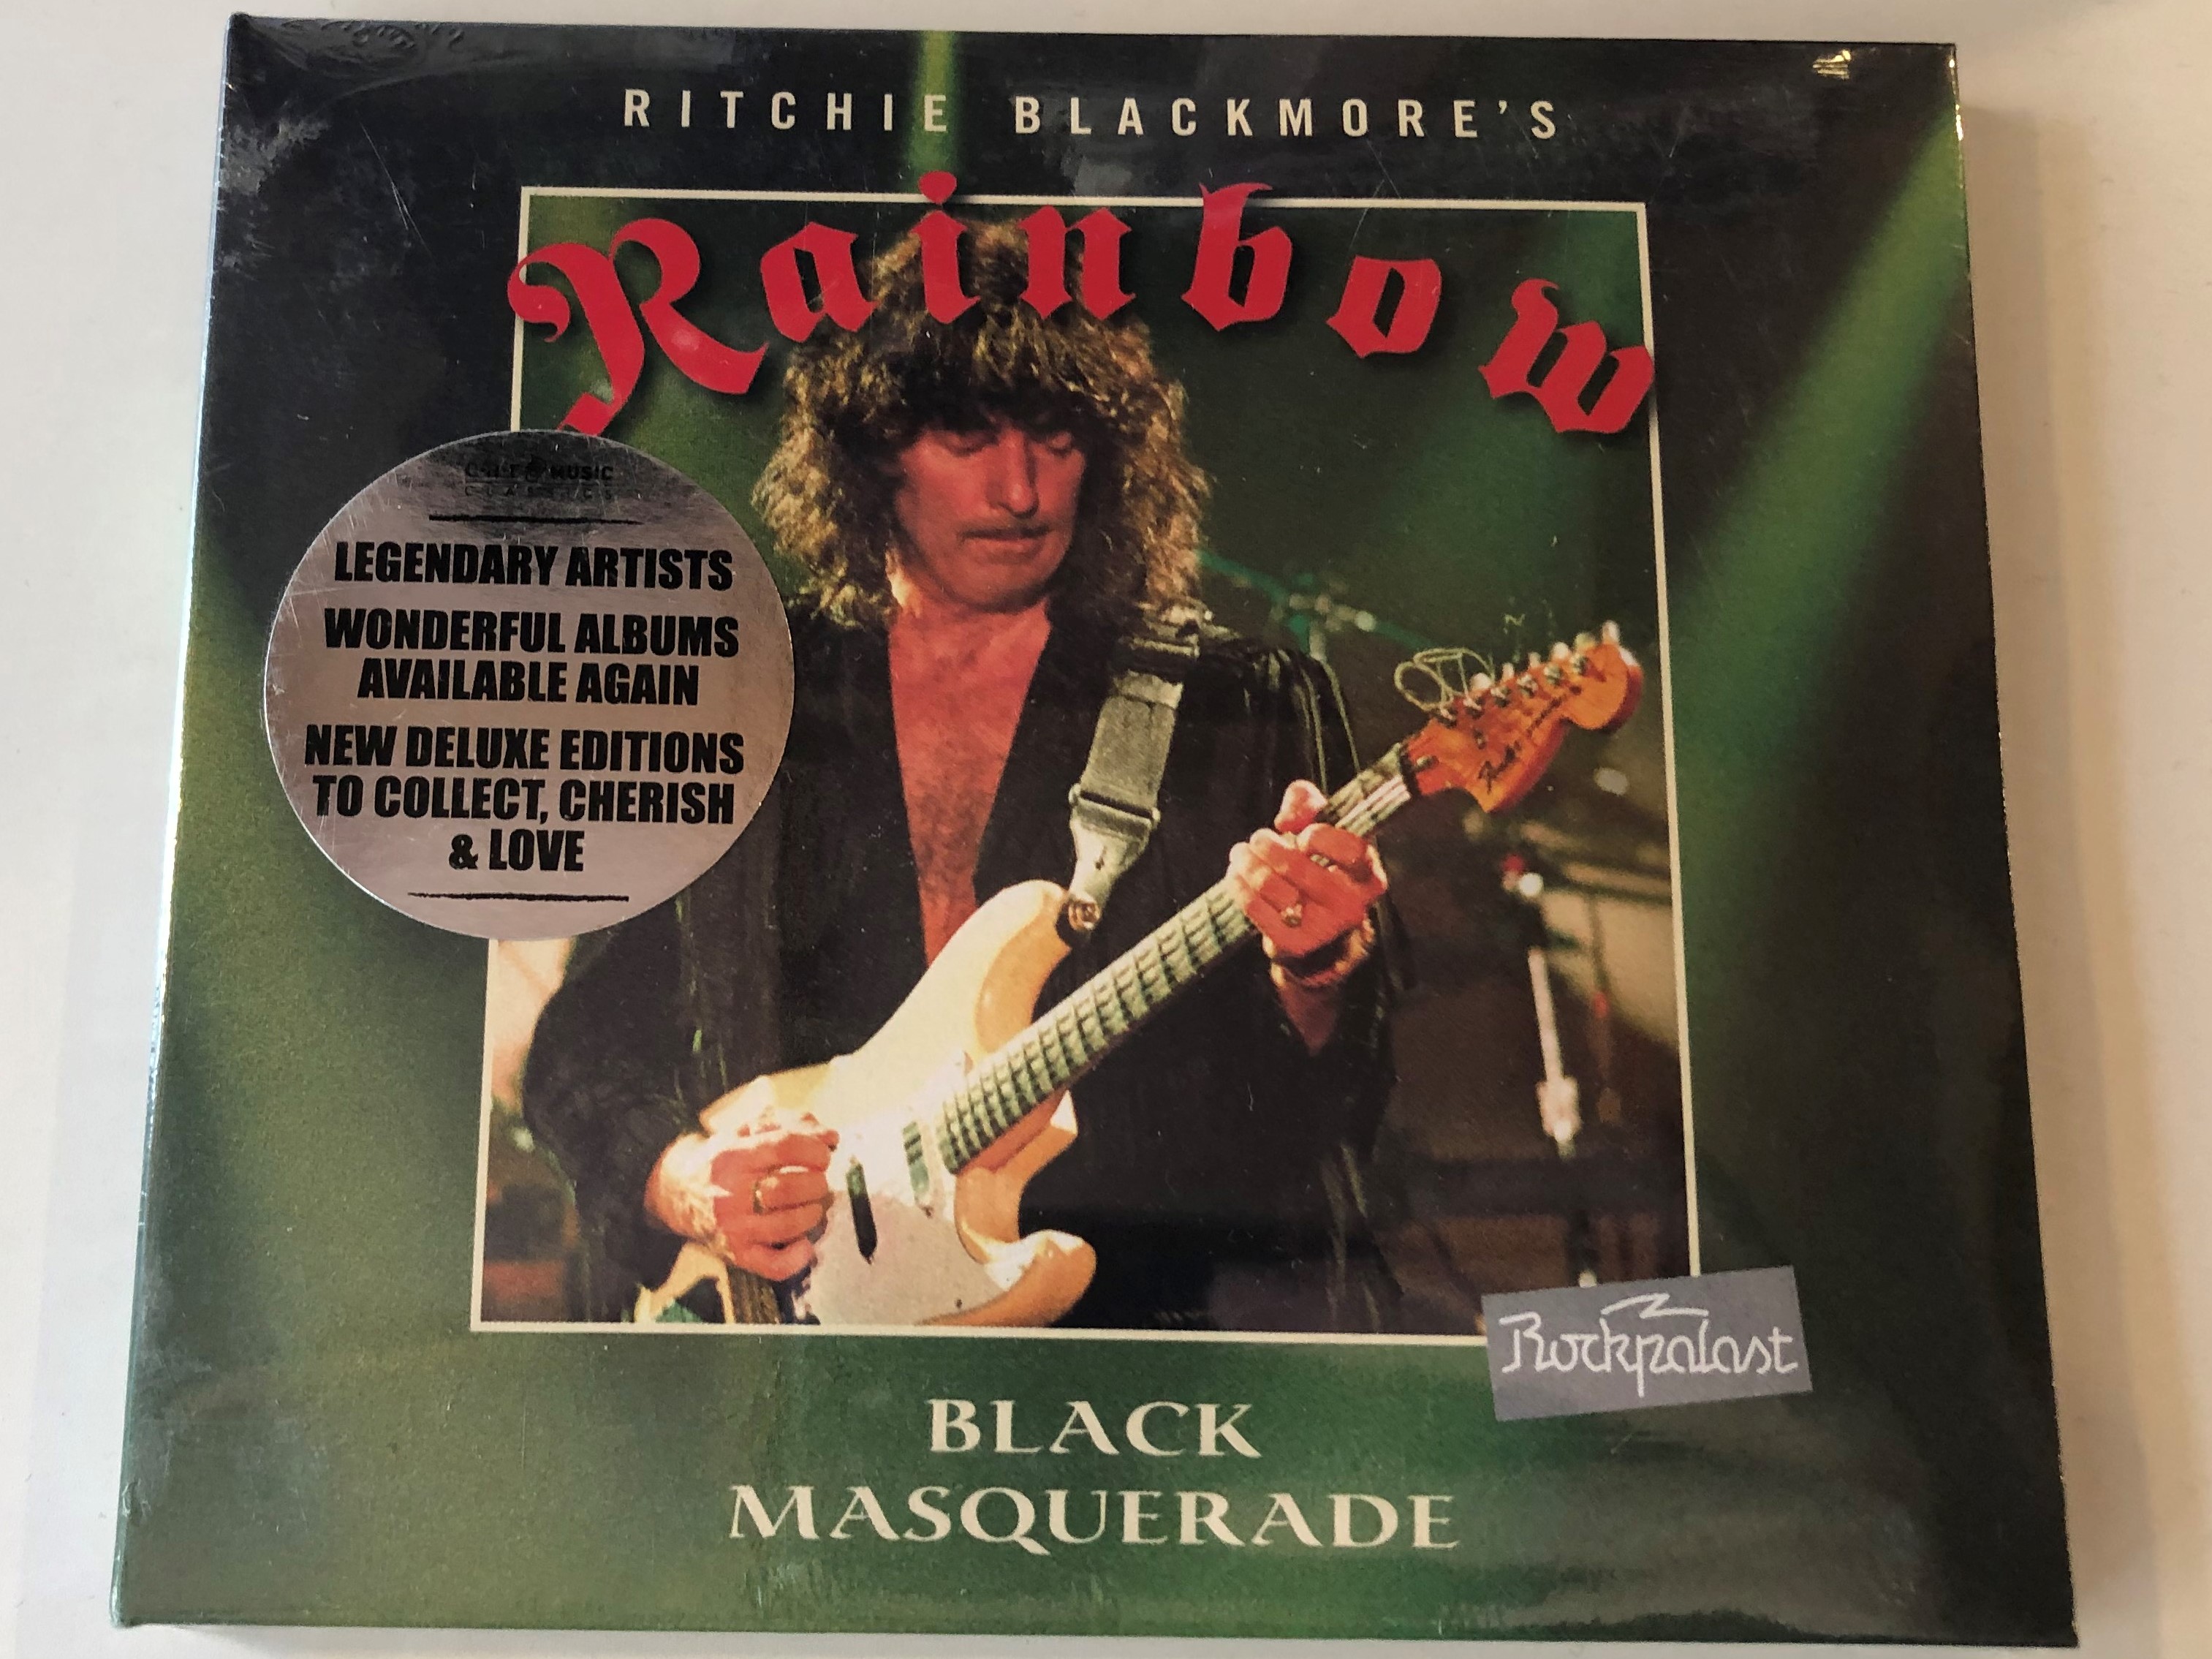 ritchie-blackmore-s-rainbow-black-masquerade-legendary-artists-wonderful-albums-avajlable-again-new-deluxe-editions-to-collect-cherish-love-ear-music-2x-audio-cd-1995-0214798emx-1-.jpg